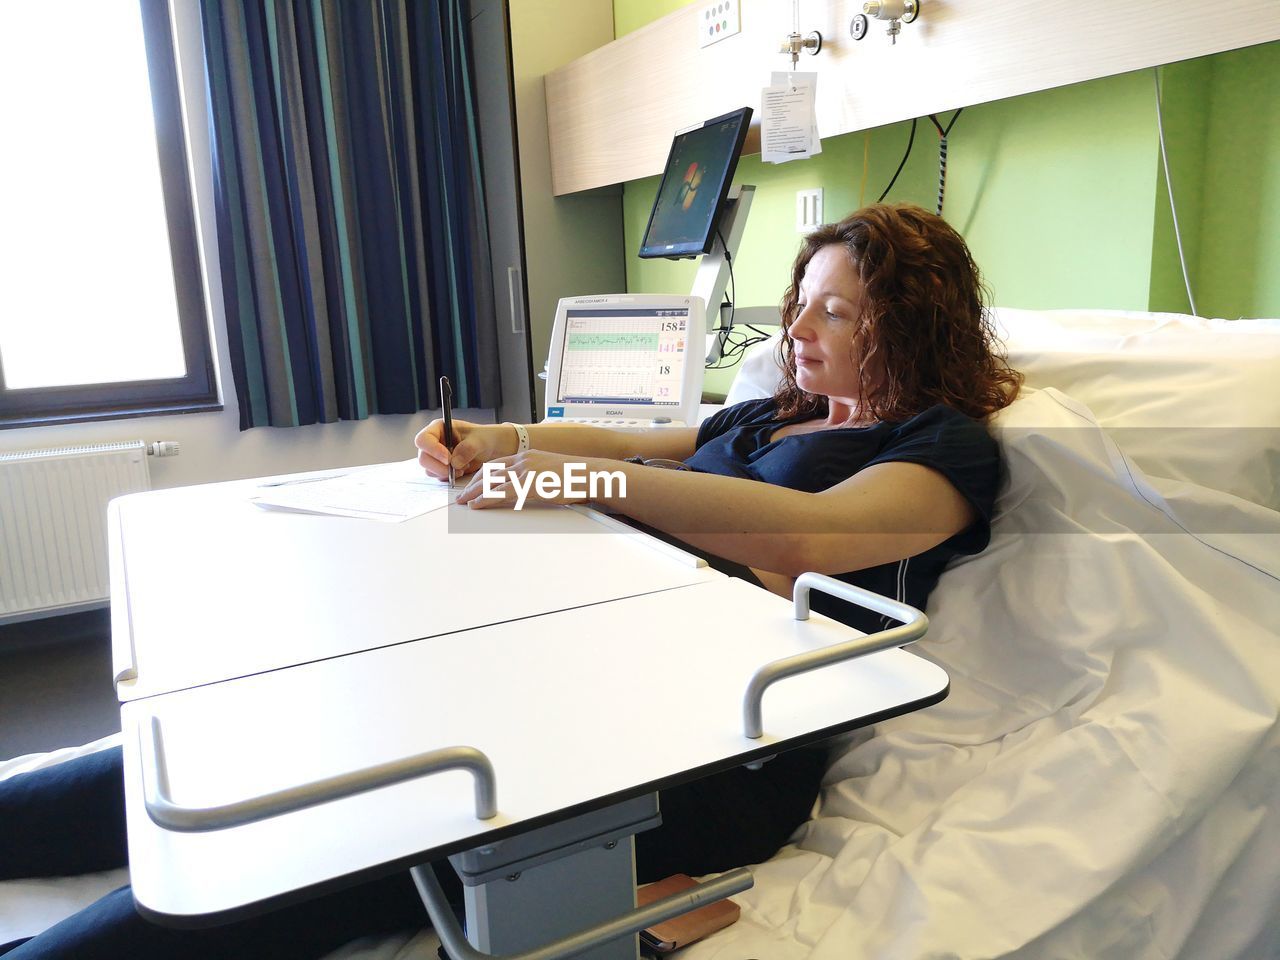 Woman writing while sitting on bed at hospital